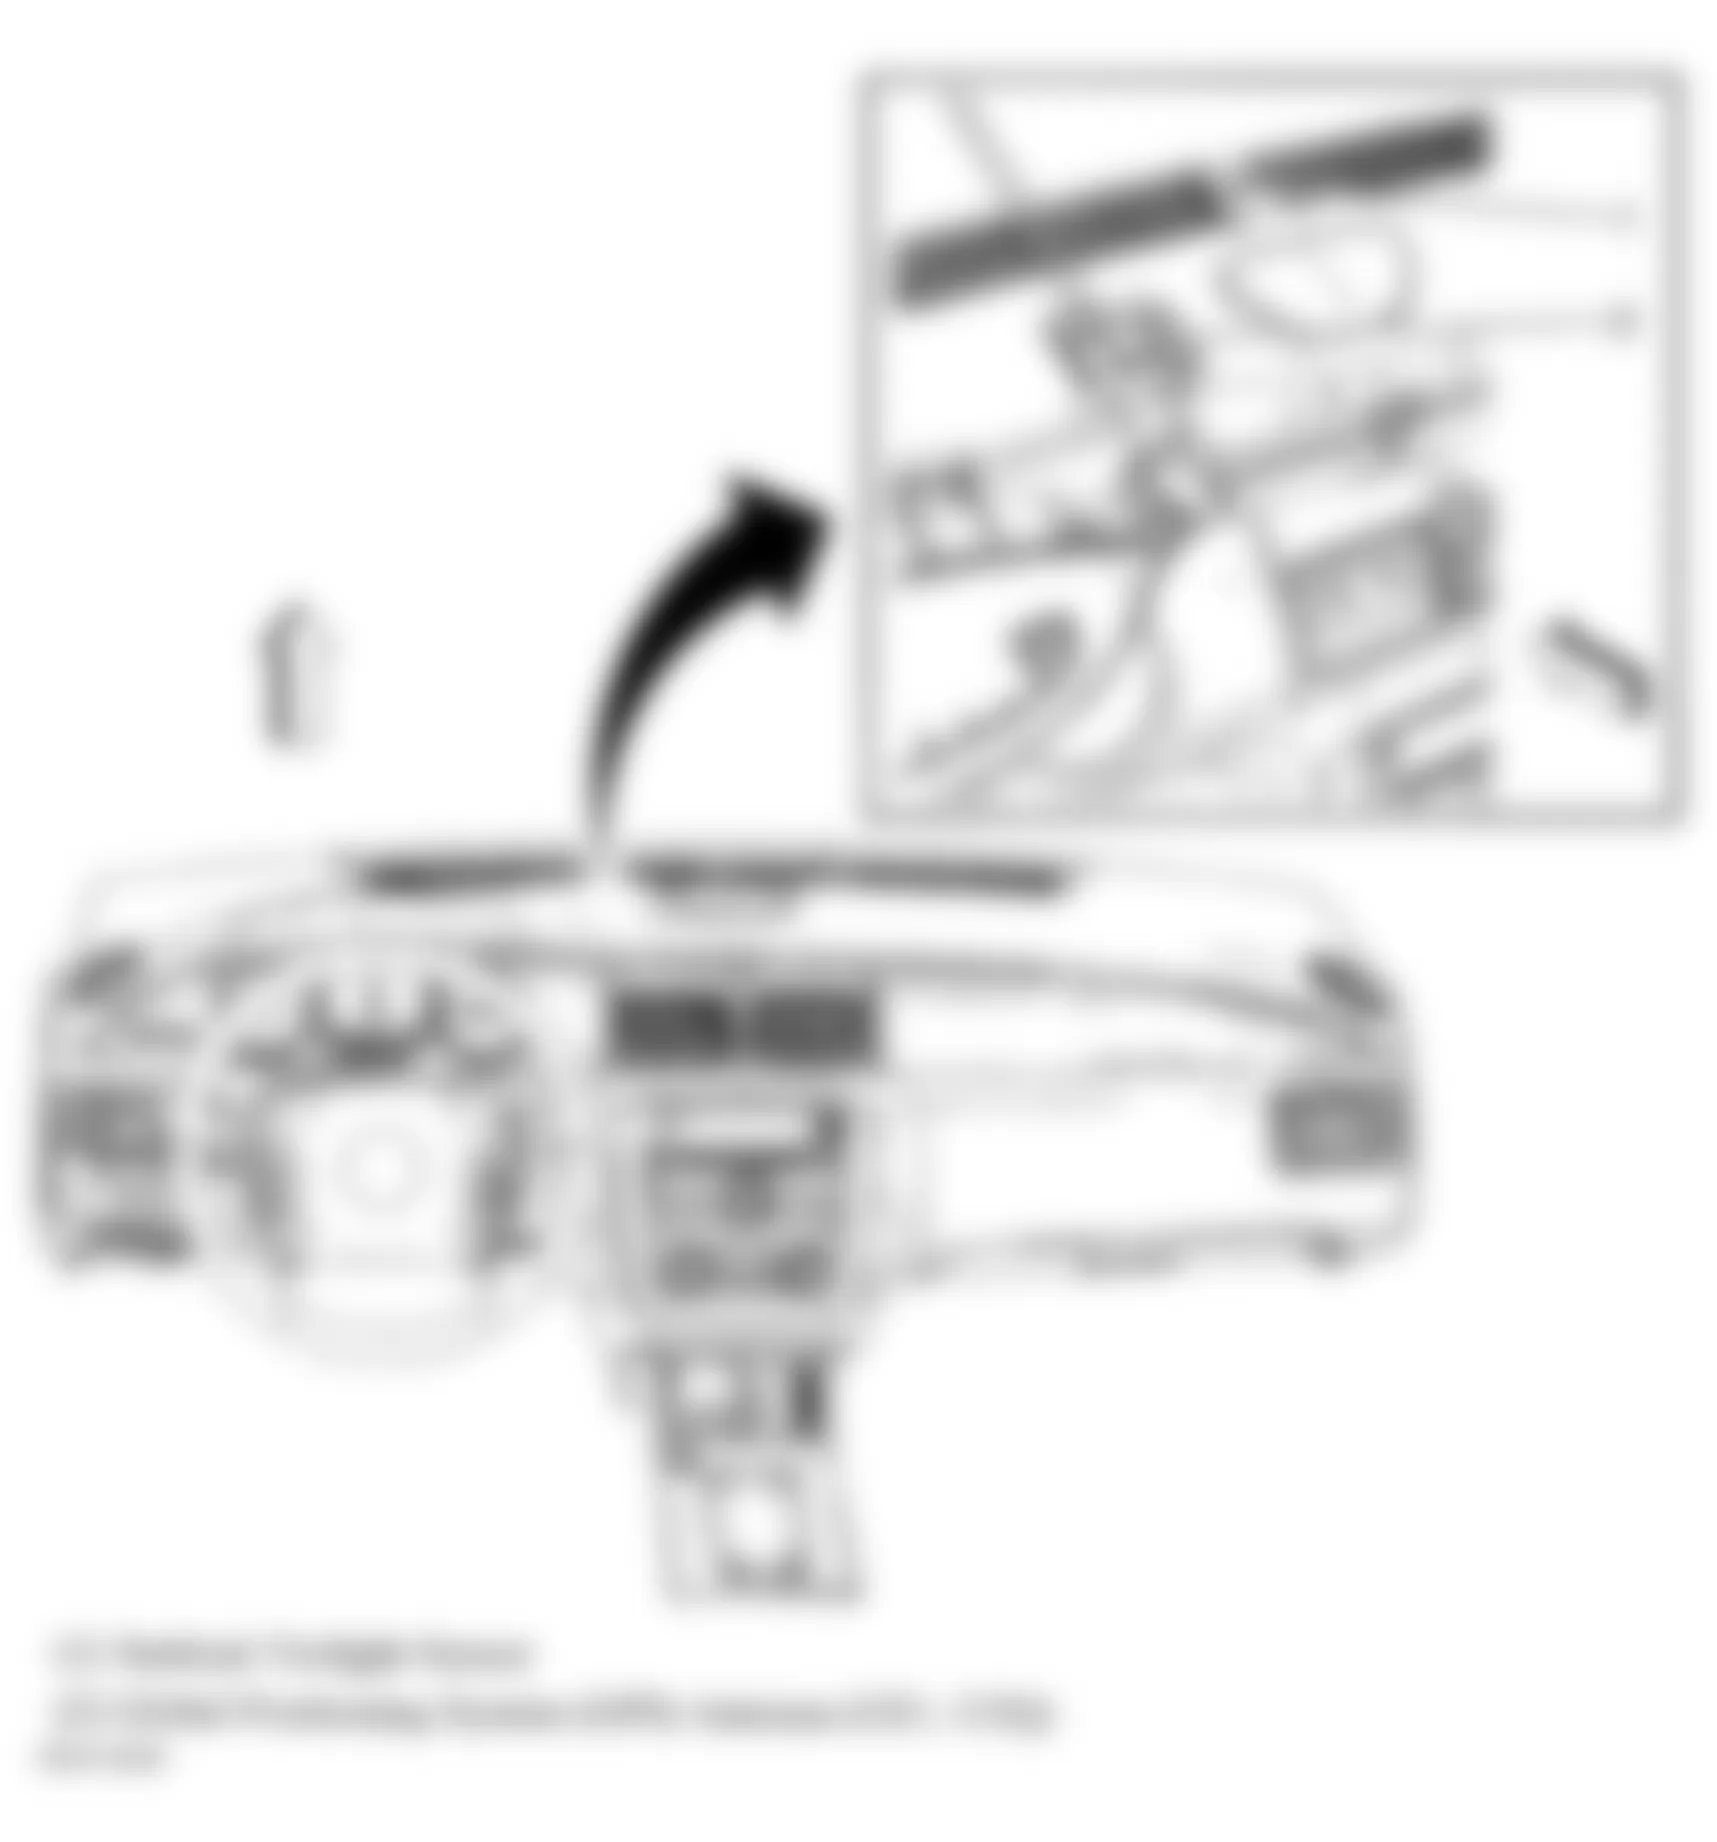 Buick Lucerne CXL 2008 - Component Locations -  Top Center Of Dash